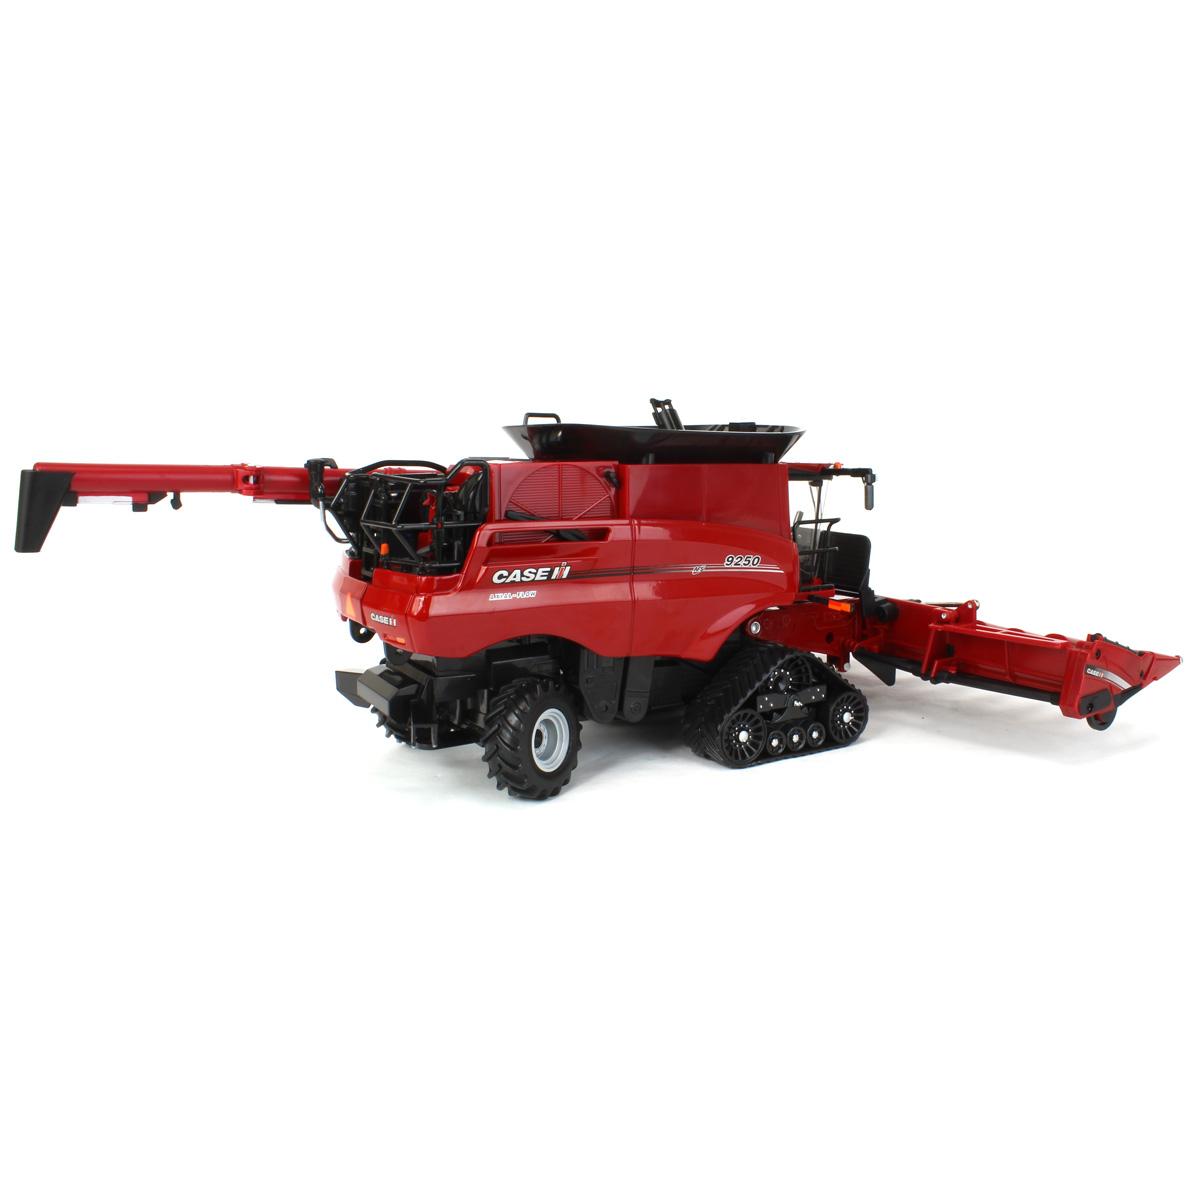 Case IH AFS Connect 9250 Tracked Combine with 2 Heads Prestige Collection